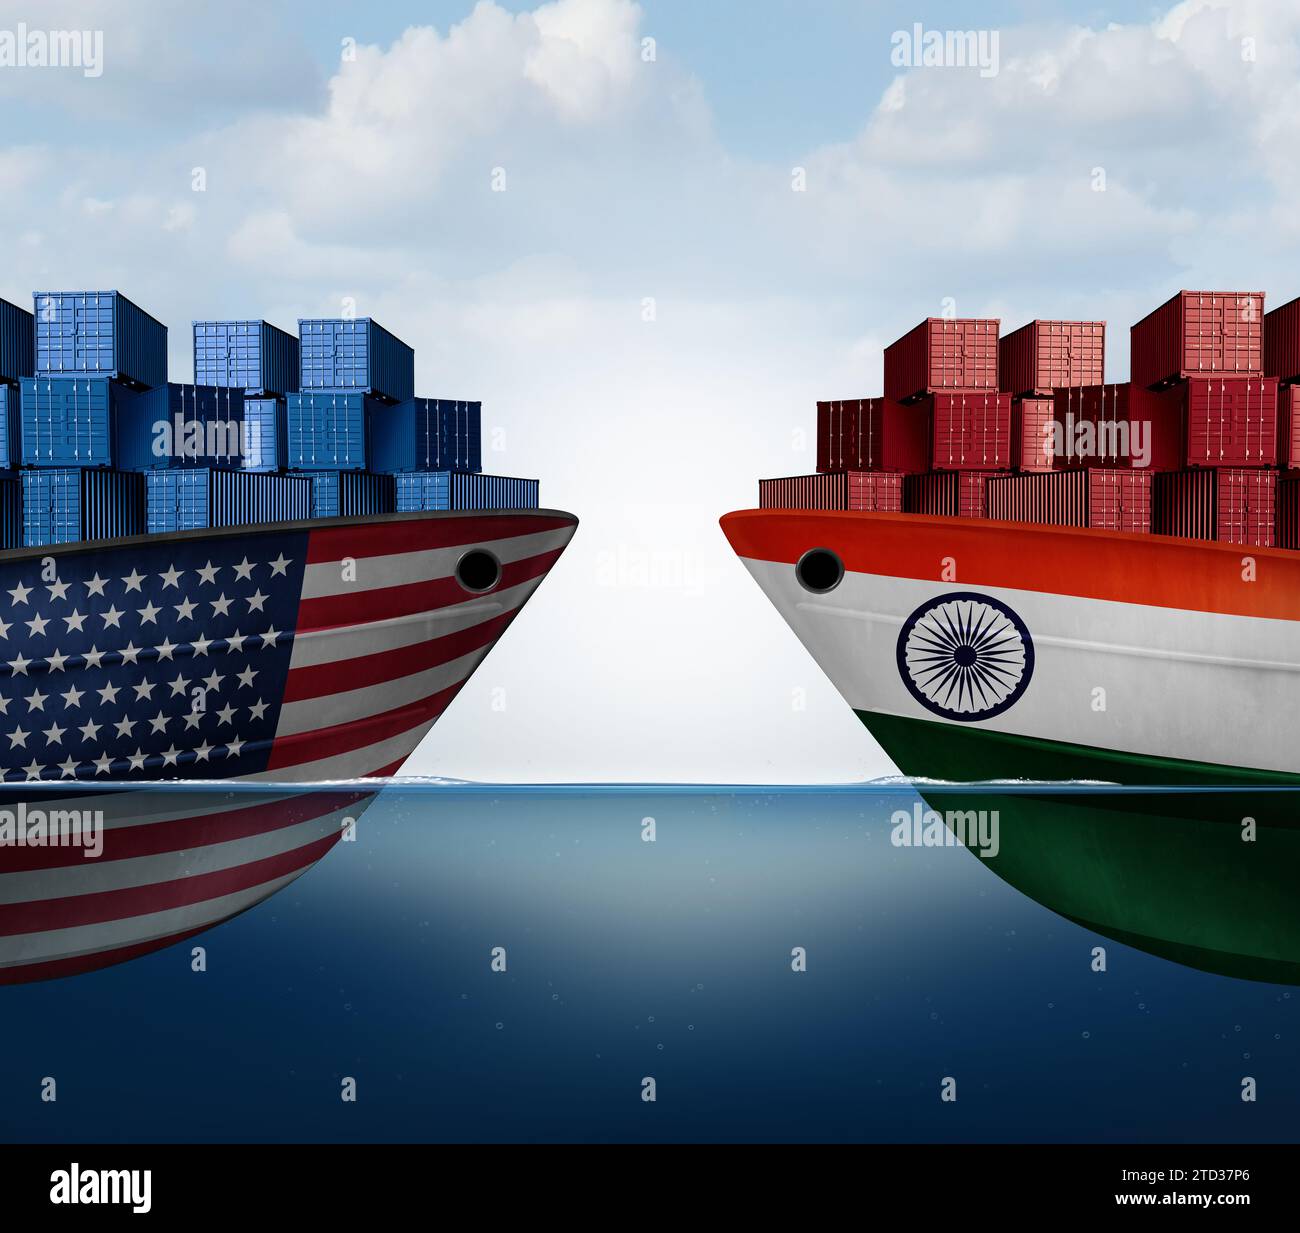 India United States trade and American tariffs or Indian Tarriff as two opposing cargo ships as an economic taxation dispute over import and exports Stock Photo